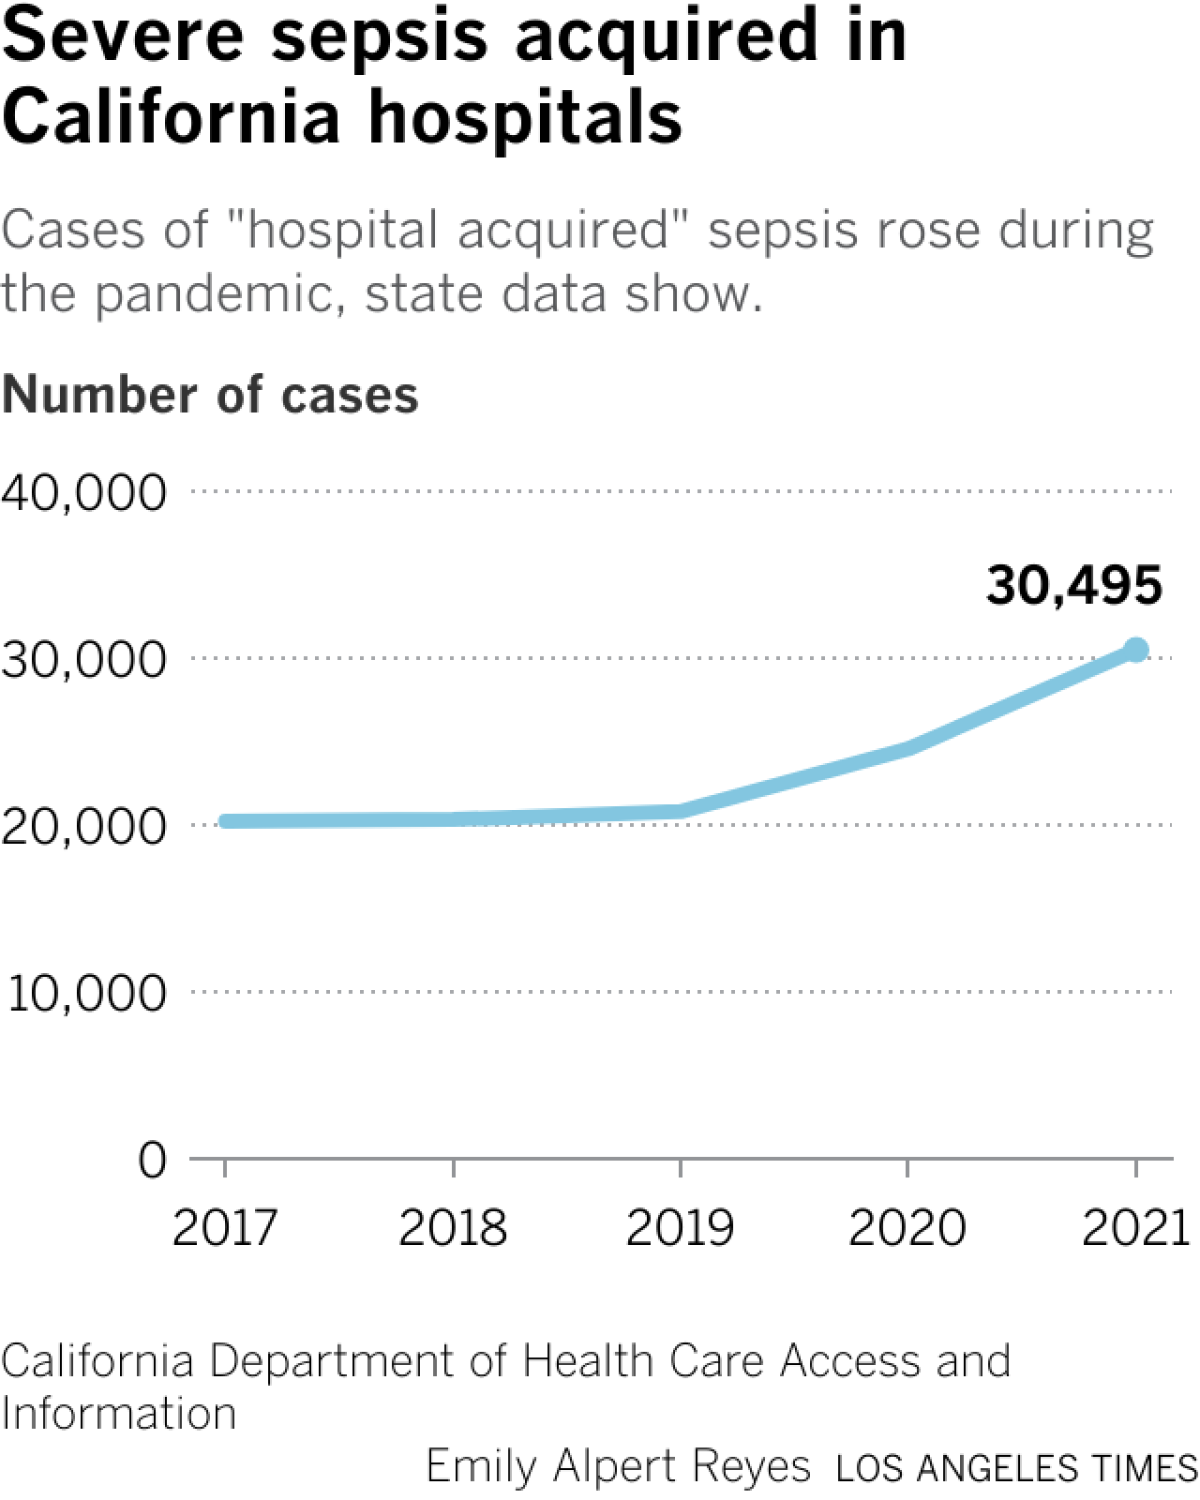 Cases of "hospital acquired" sepsis rose during the pandemic, state data show.